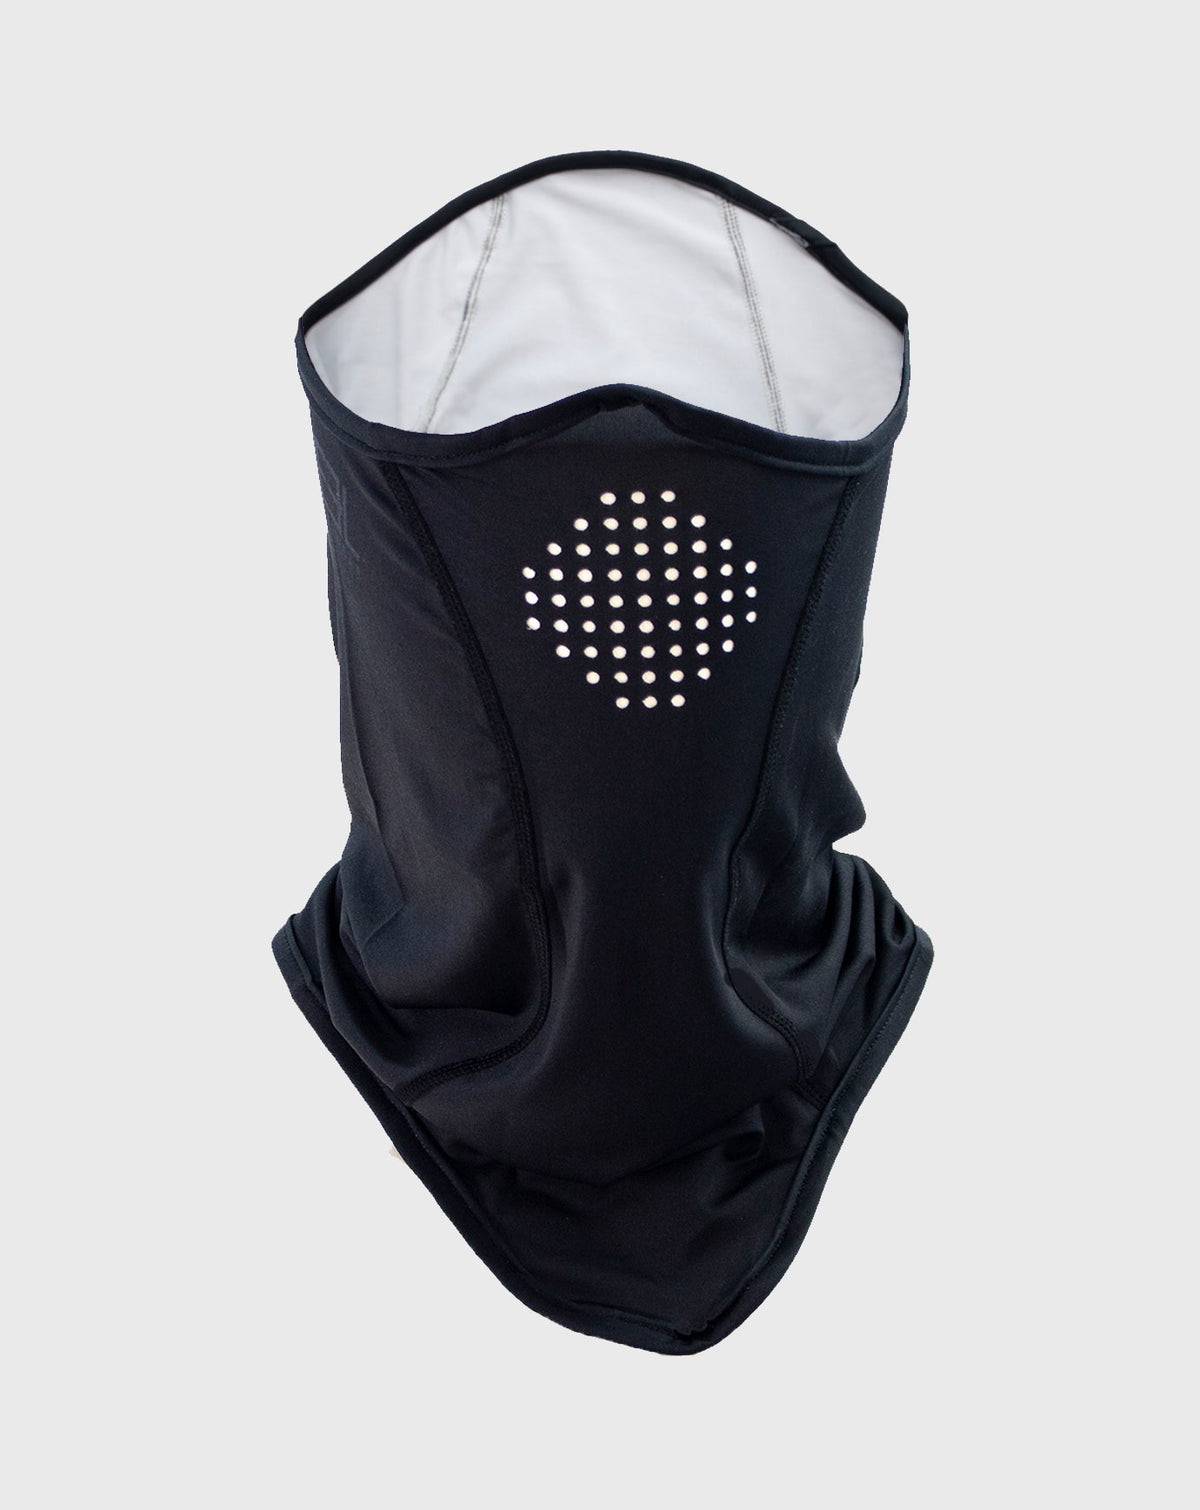 Solar Fishing Face mask with holes